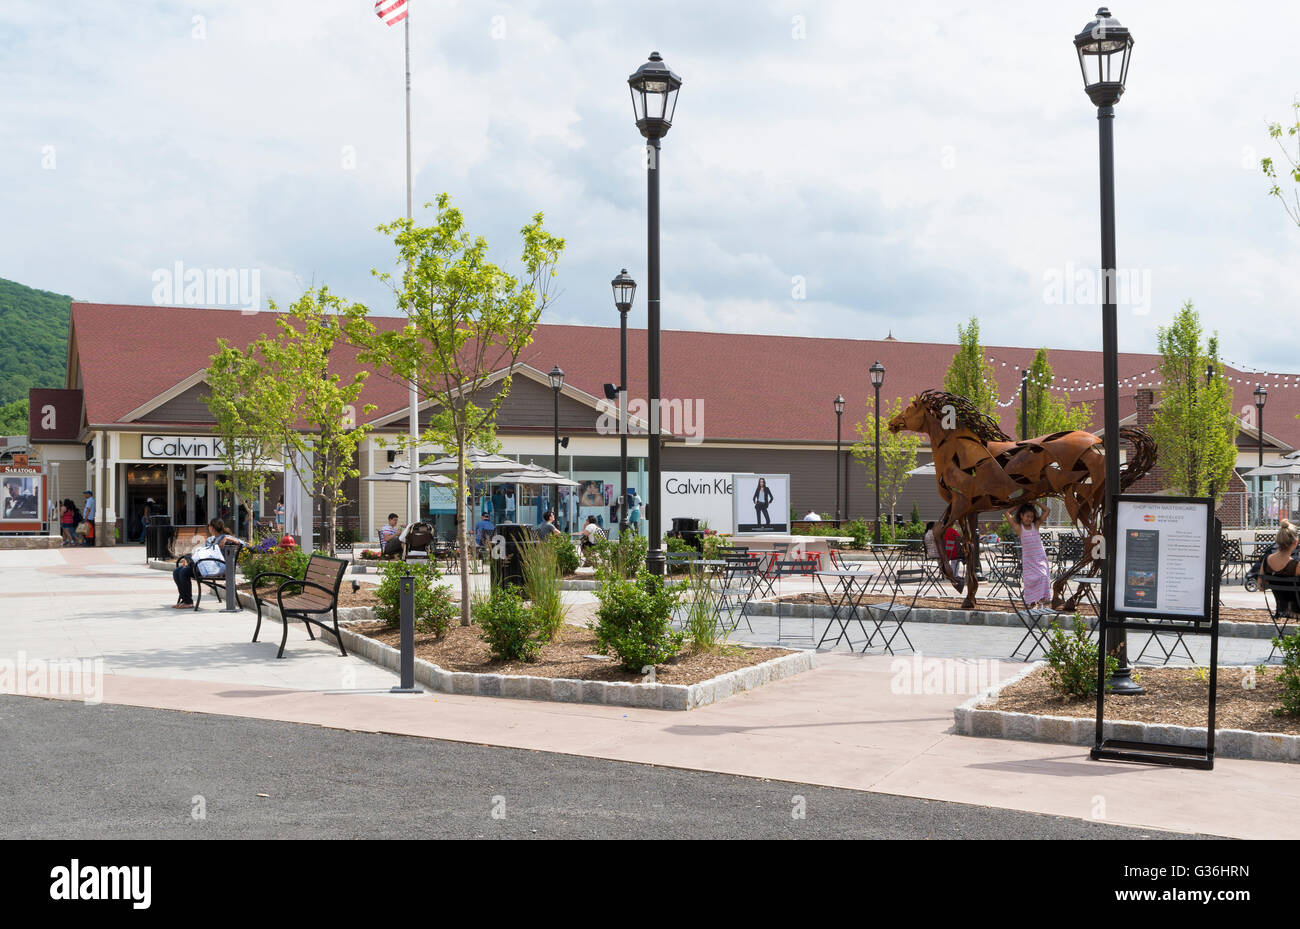 Woodbury Common outlet mall in New York looking towards the Calvin Stock Photo: 105251881 - Alamy